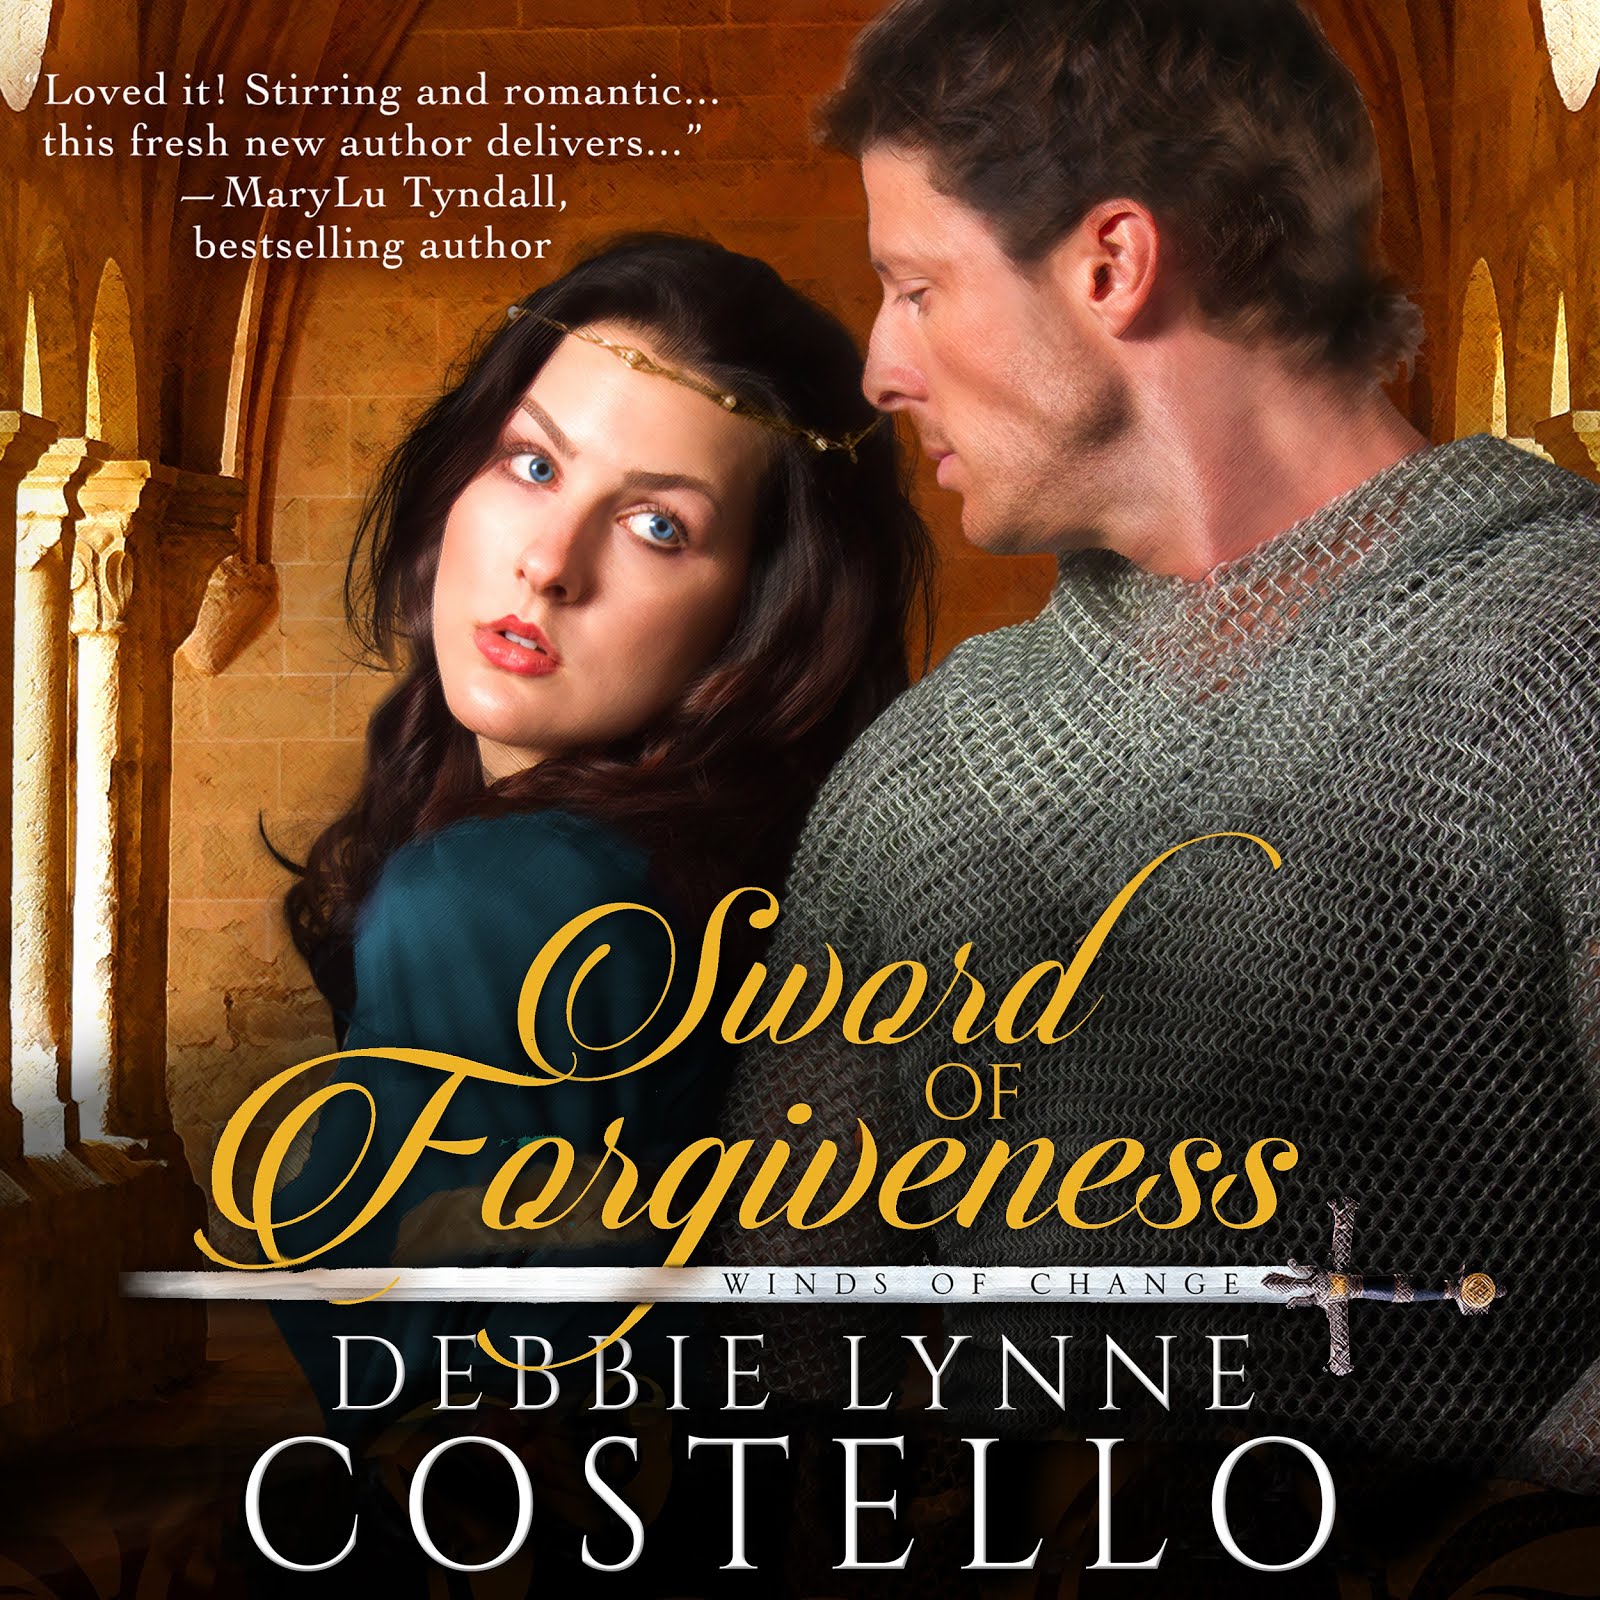 Sword of Forgiveness is now available on Audio